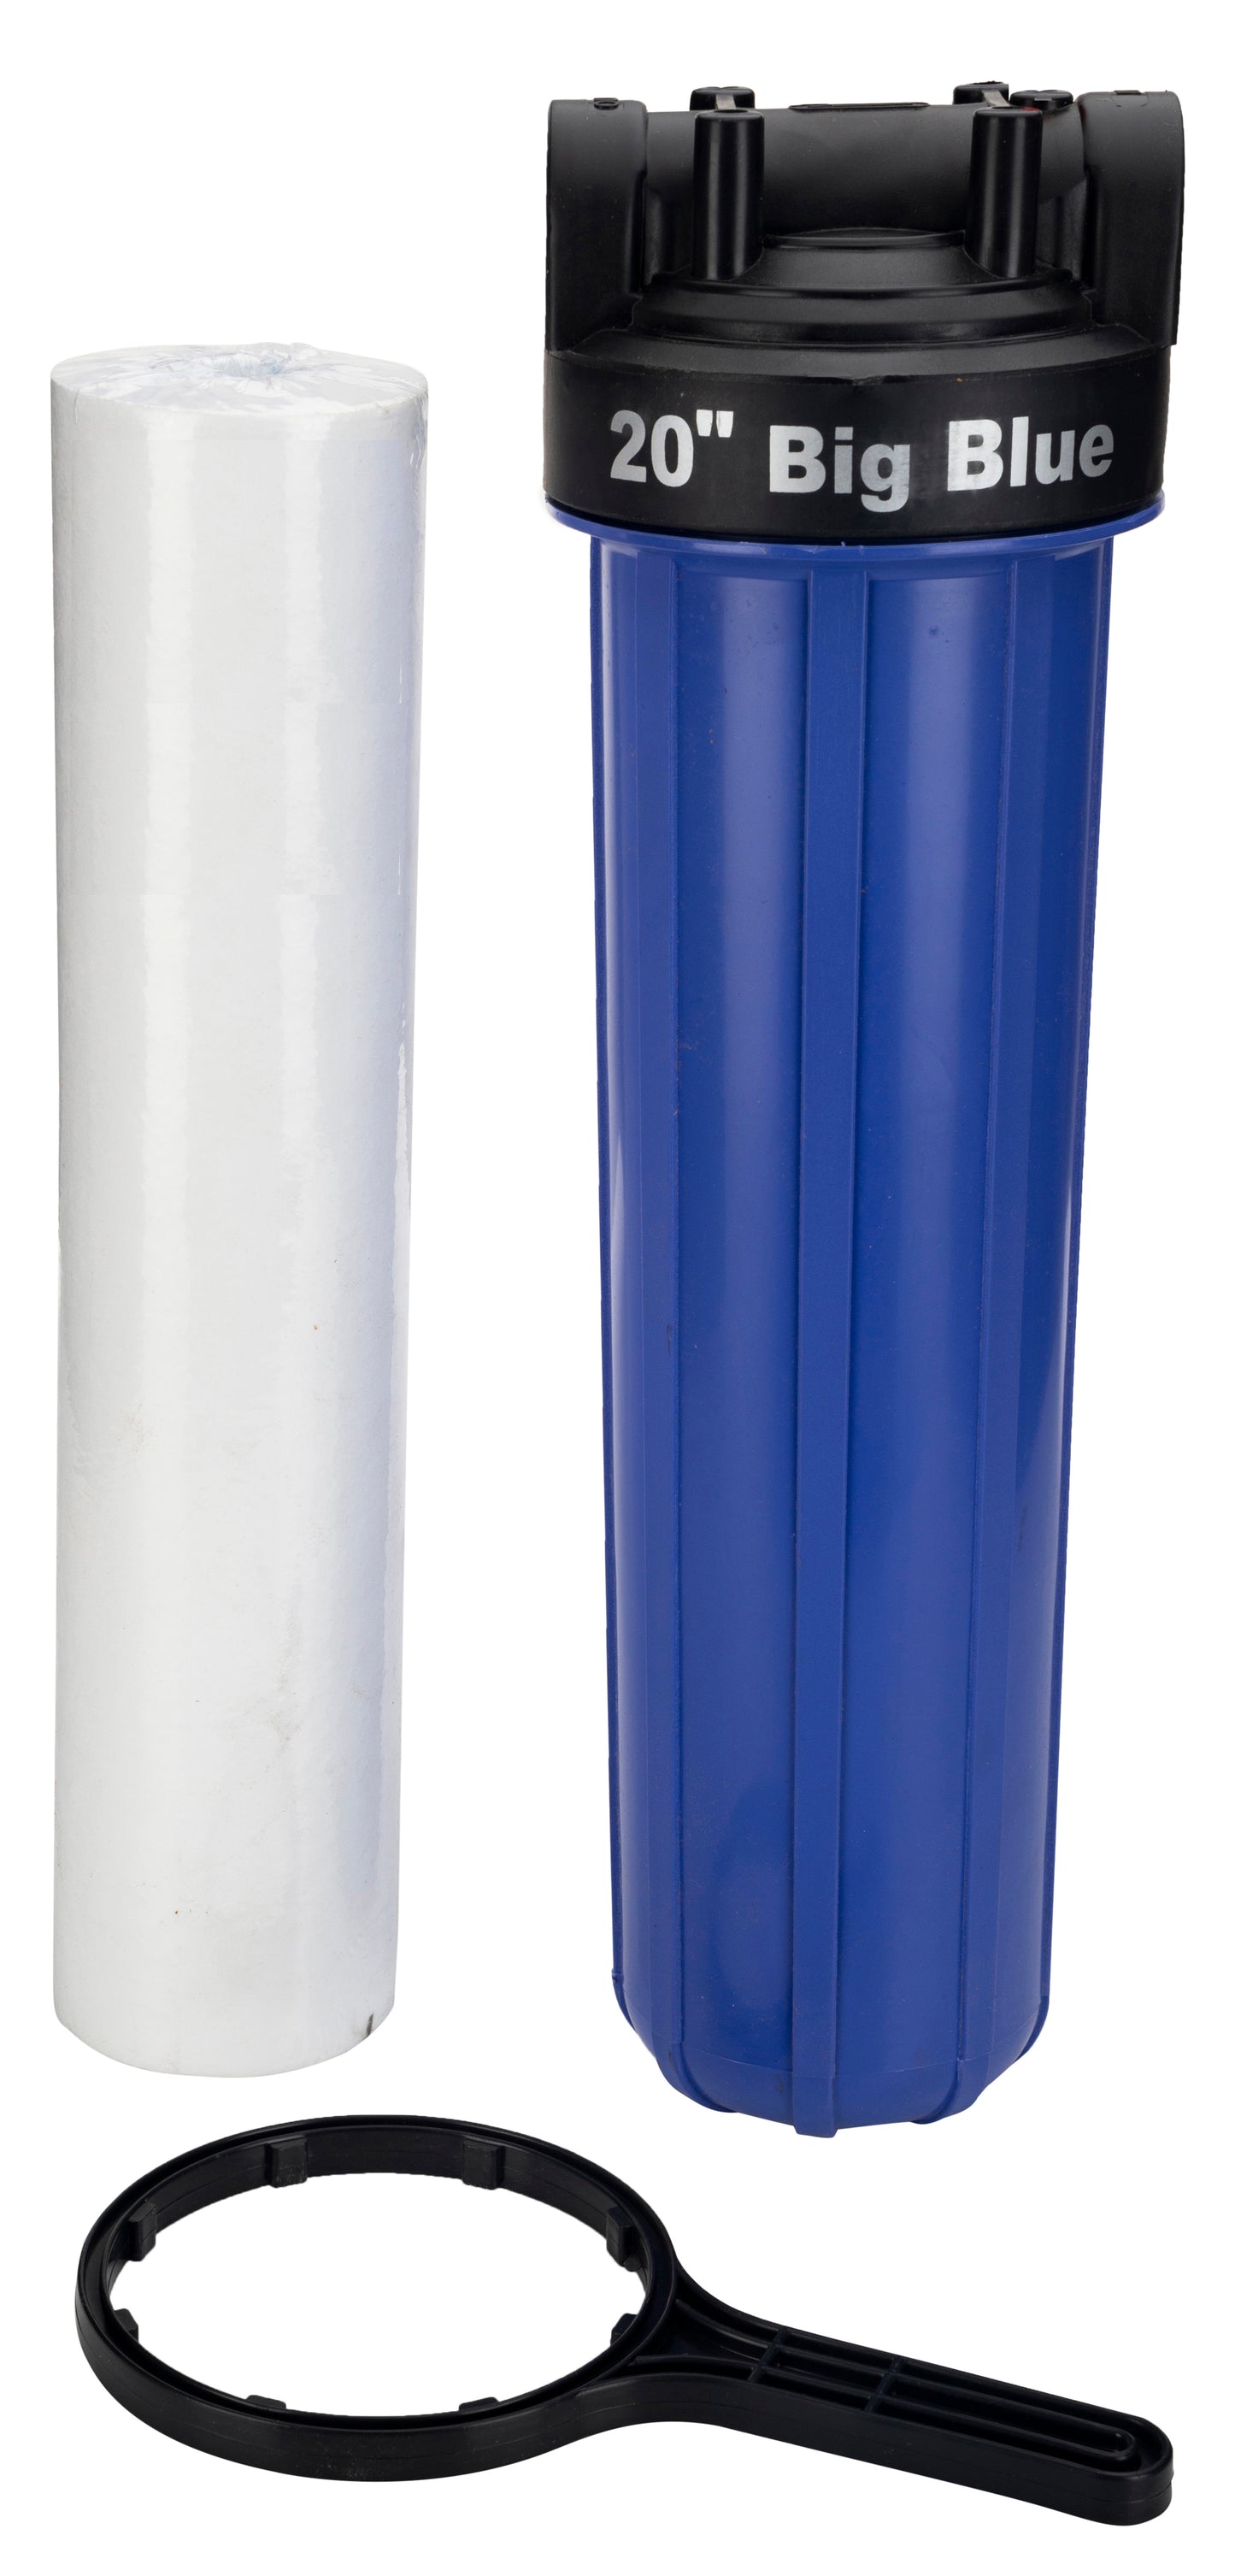 ASP-20 Mainline sediment filter | 20 inch big blue housing with spun cartridge | with water softening siliphos balls | 5 micron| 1 inch inlet outlet